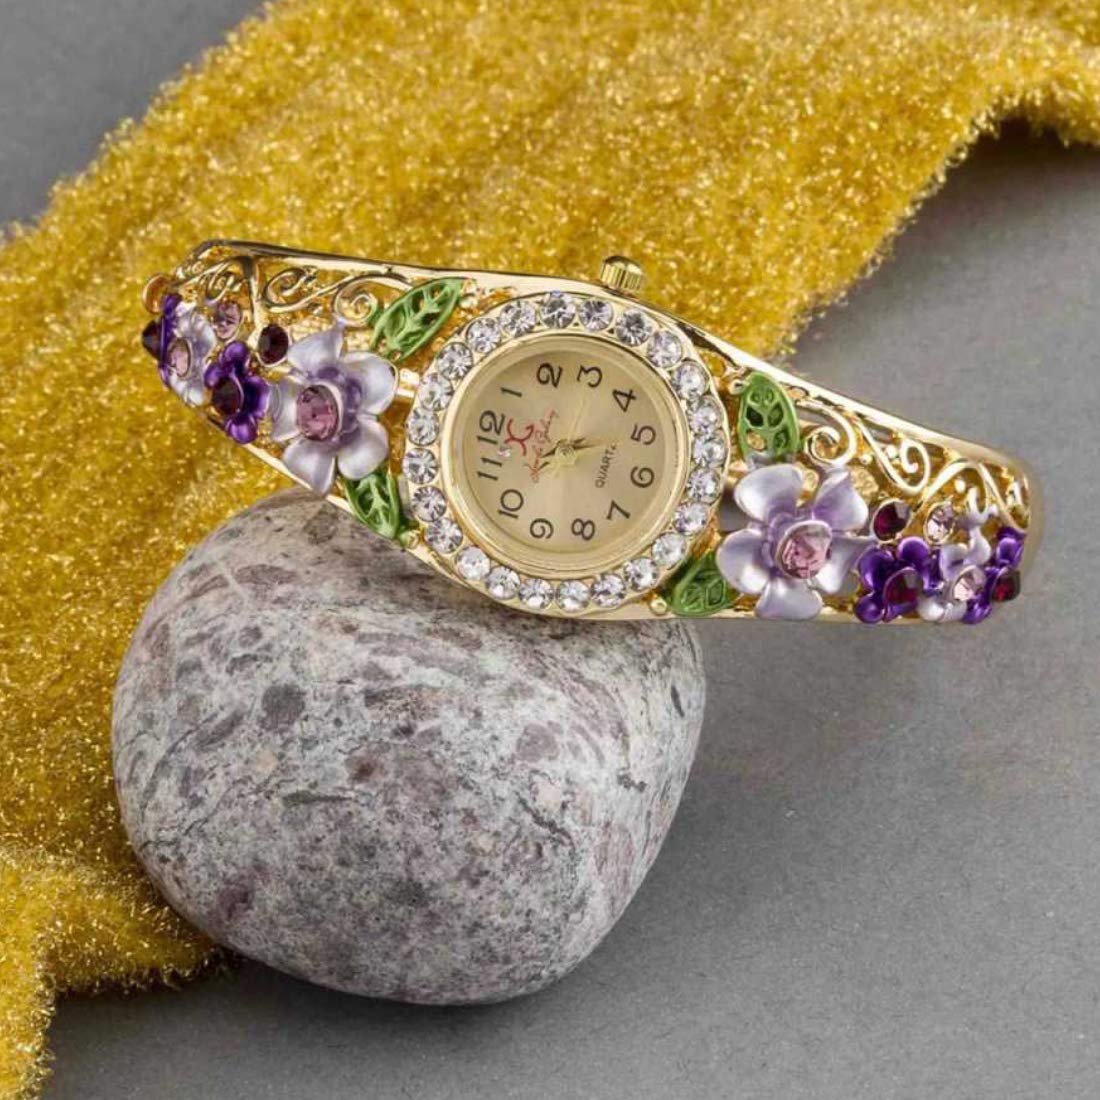 Yellow Chimes Exclusive Floral Design Multi Color Crystal Watch Kada Bangle Bracelet for Women